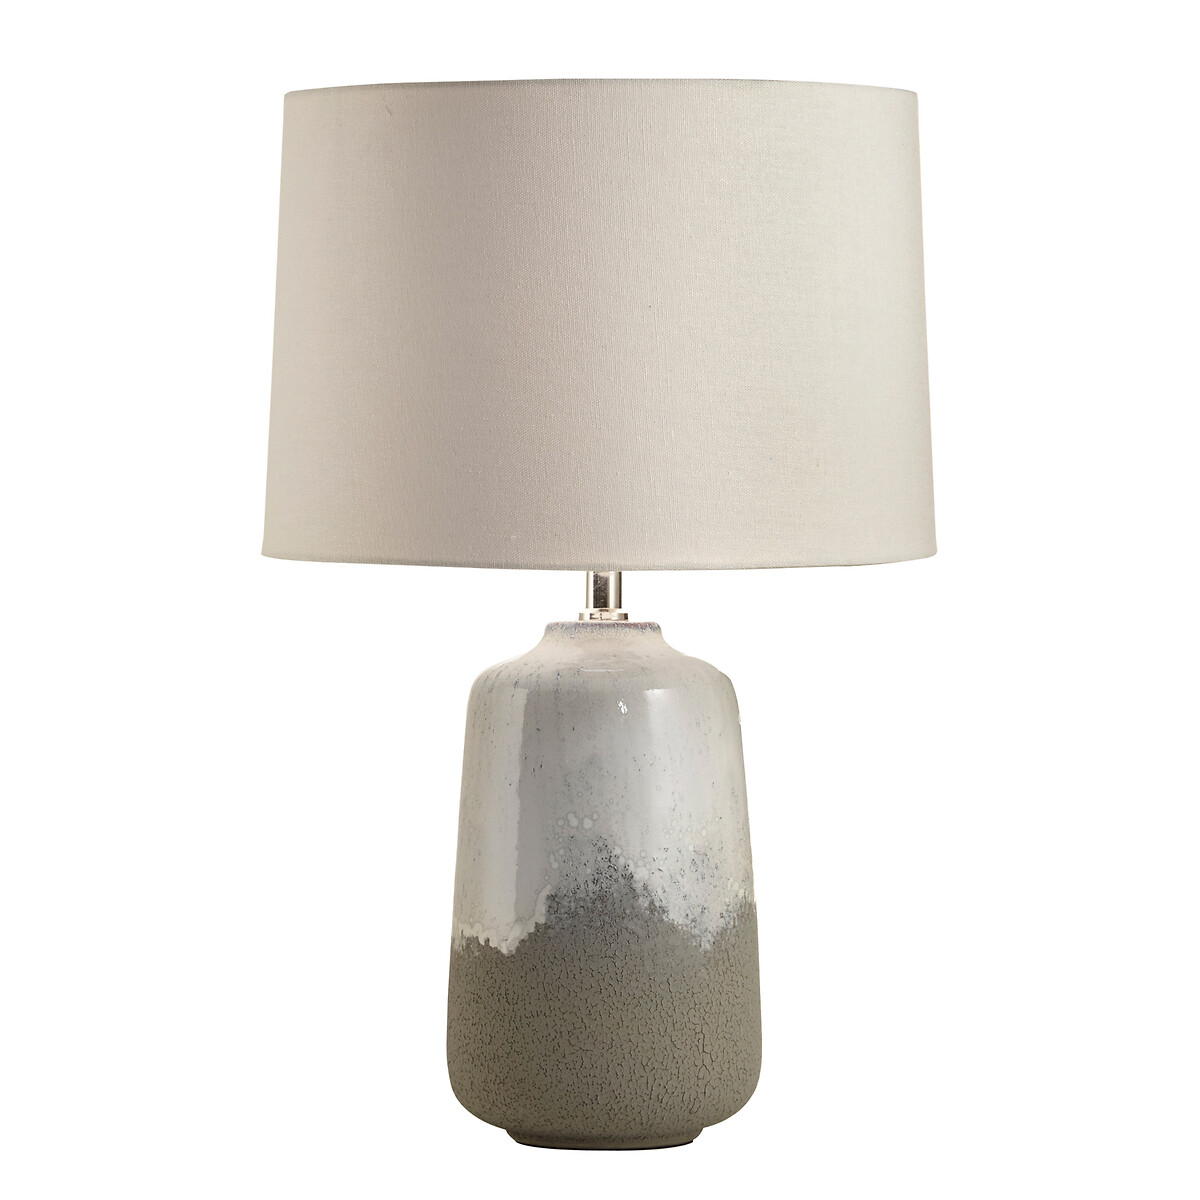 Grey Ceramic Le Base With Ivory, Ivory Drip Ceramic Table Lamp